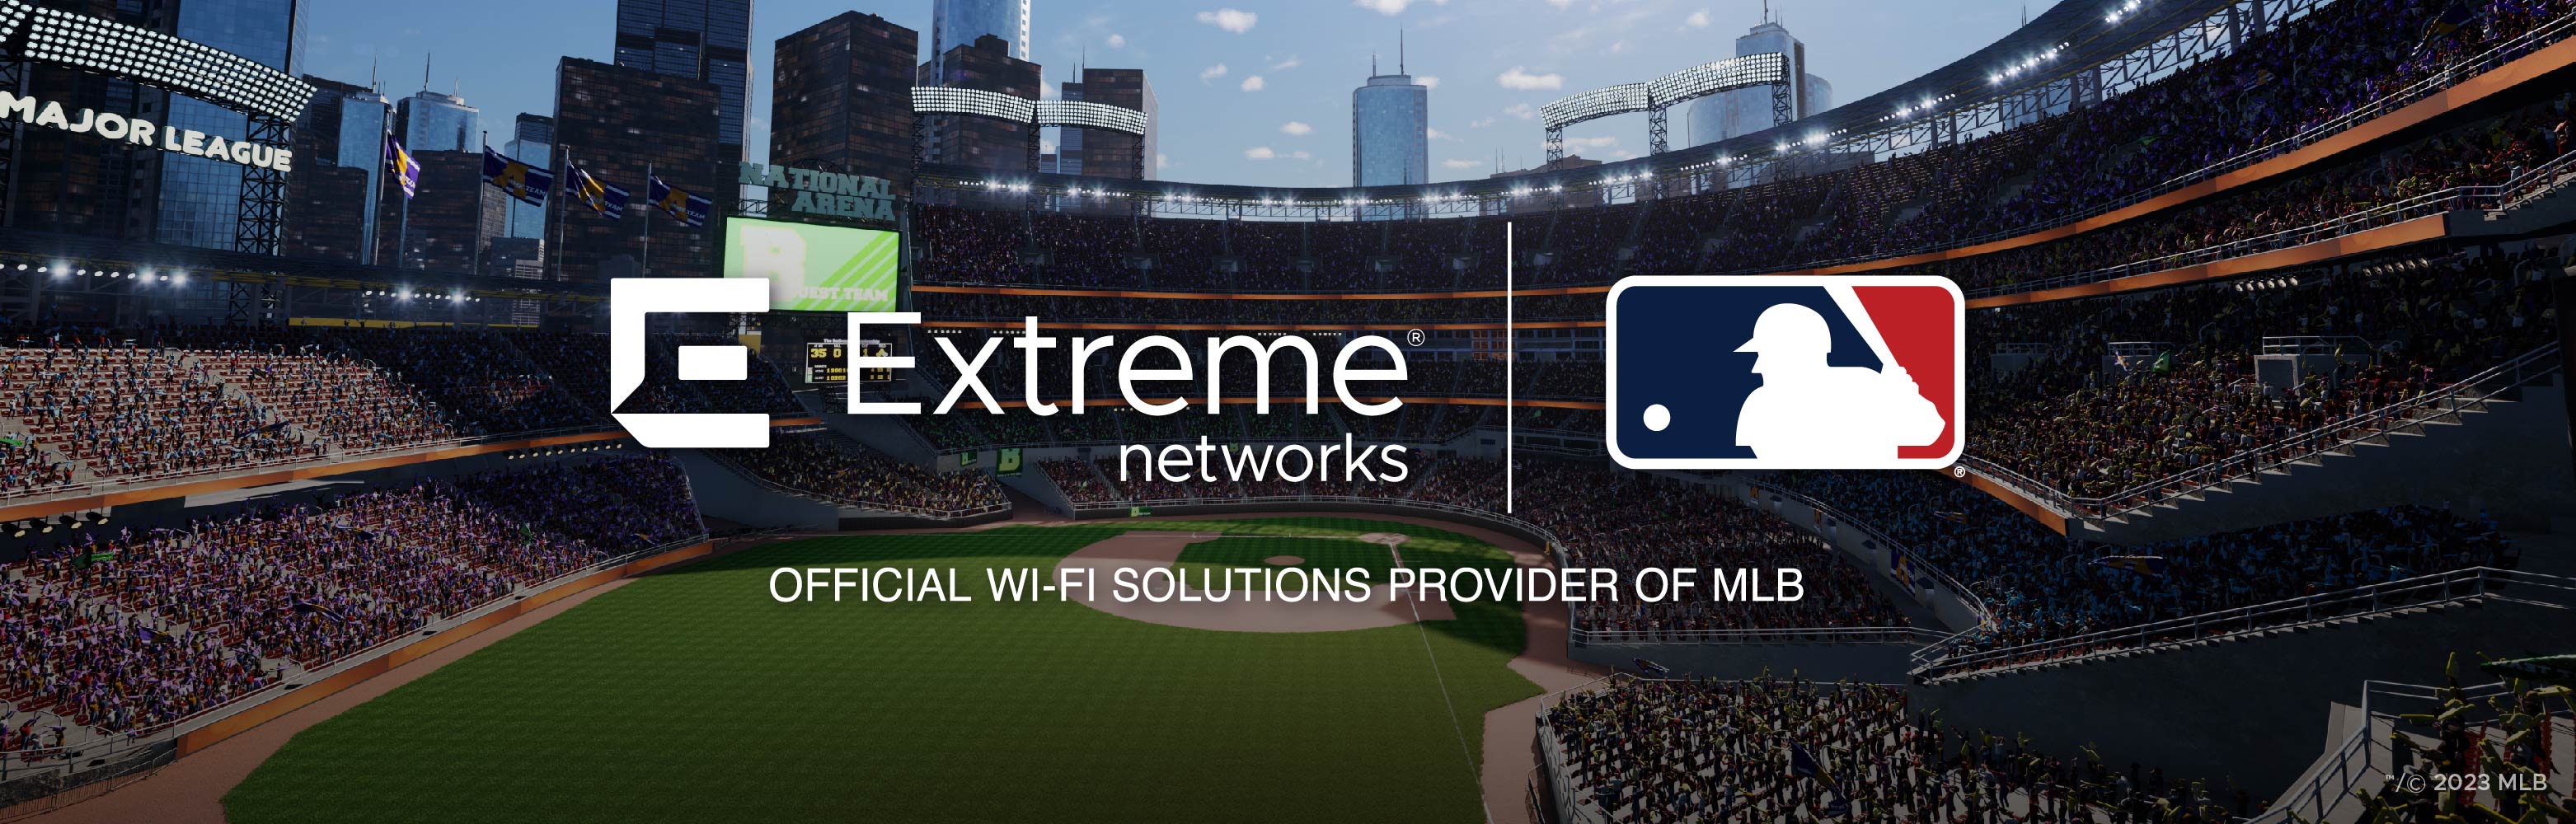 Faster Games, Faster Networks, Epic Experiences A Preview of the 2023 MLB Season Extreme Networks